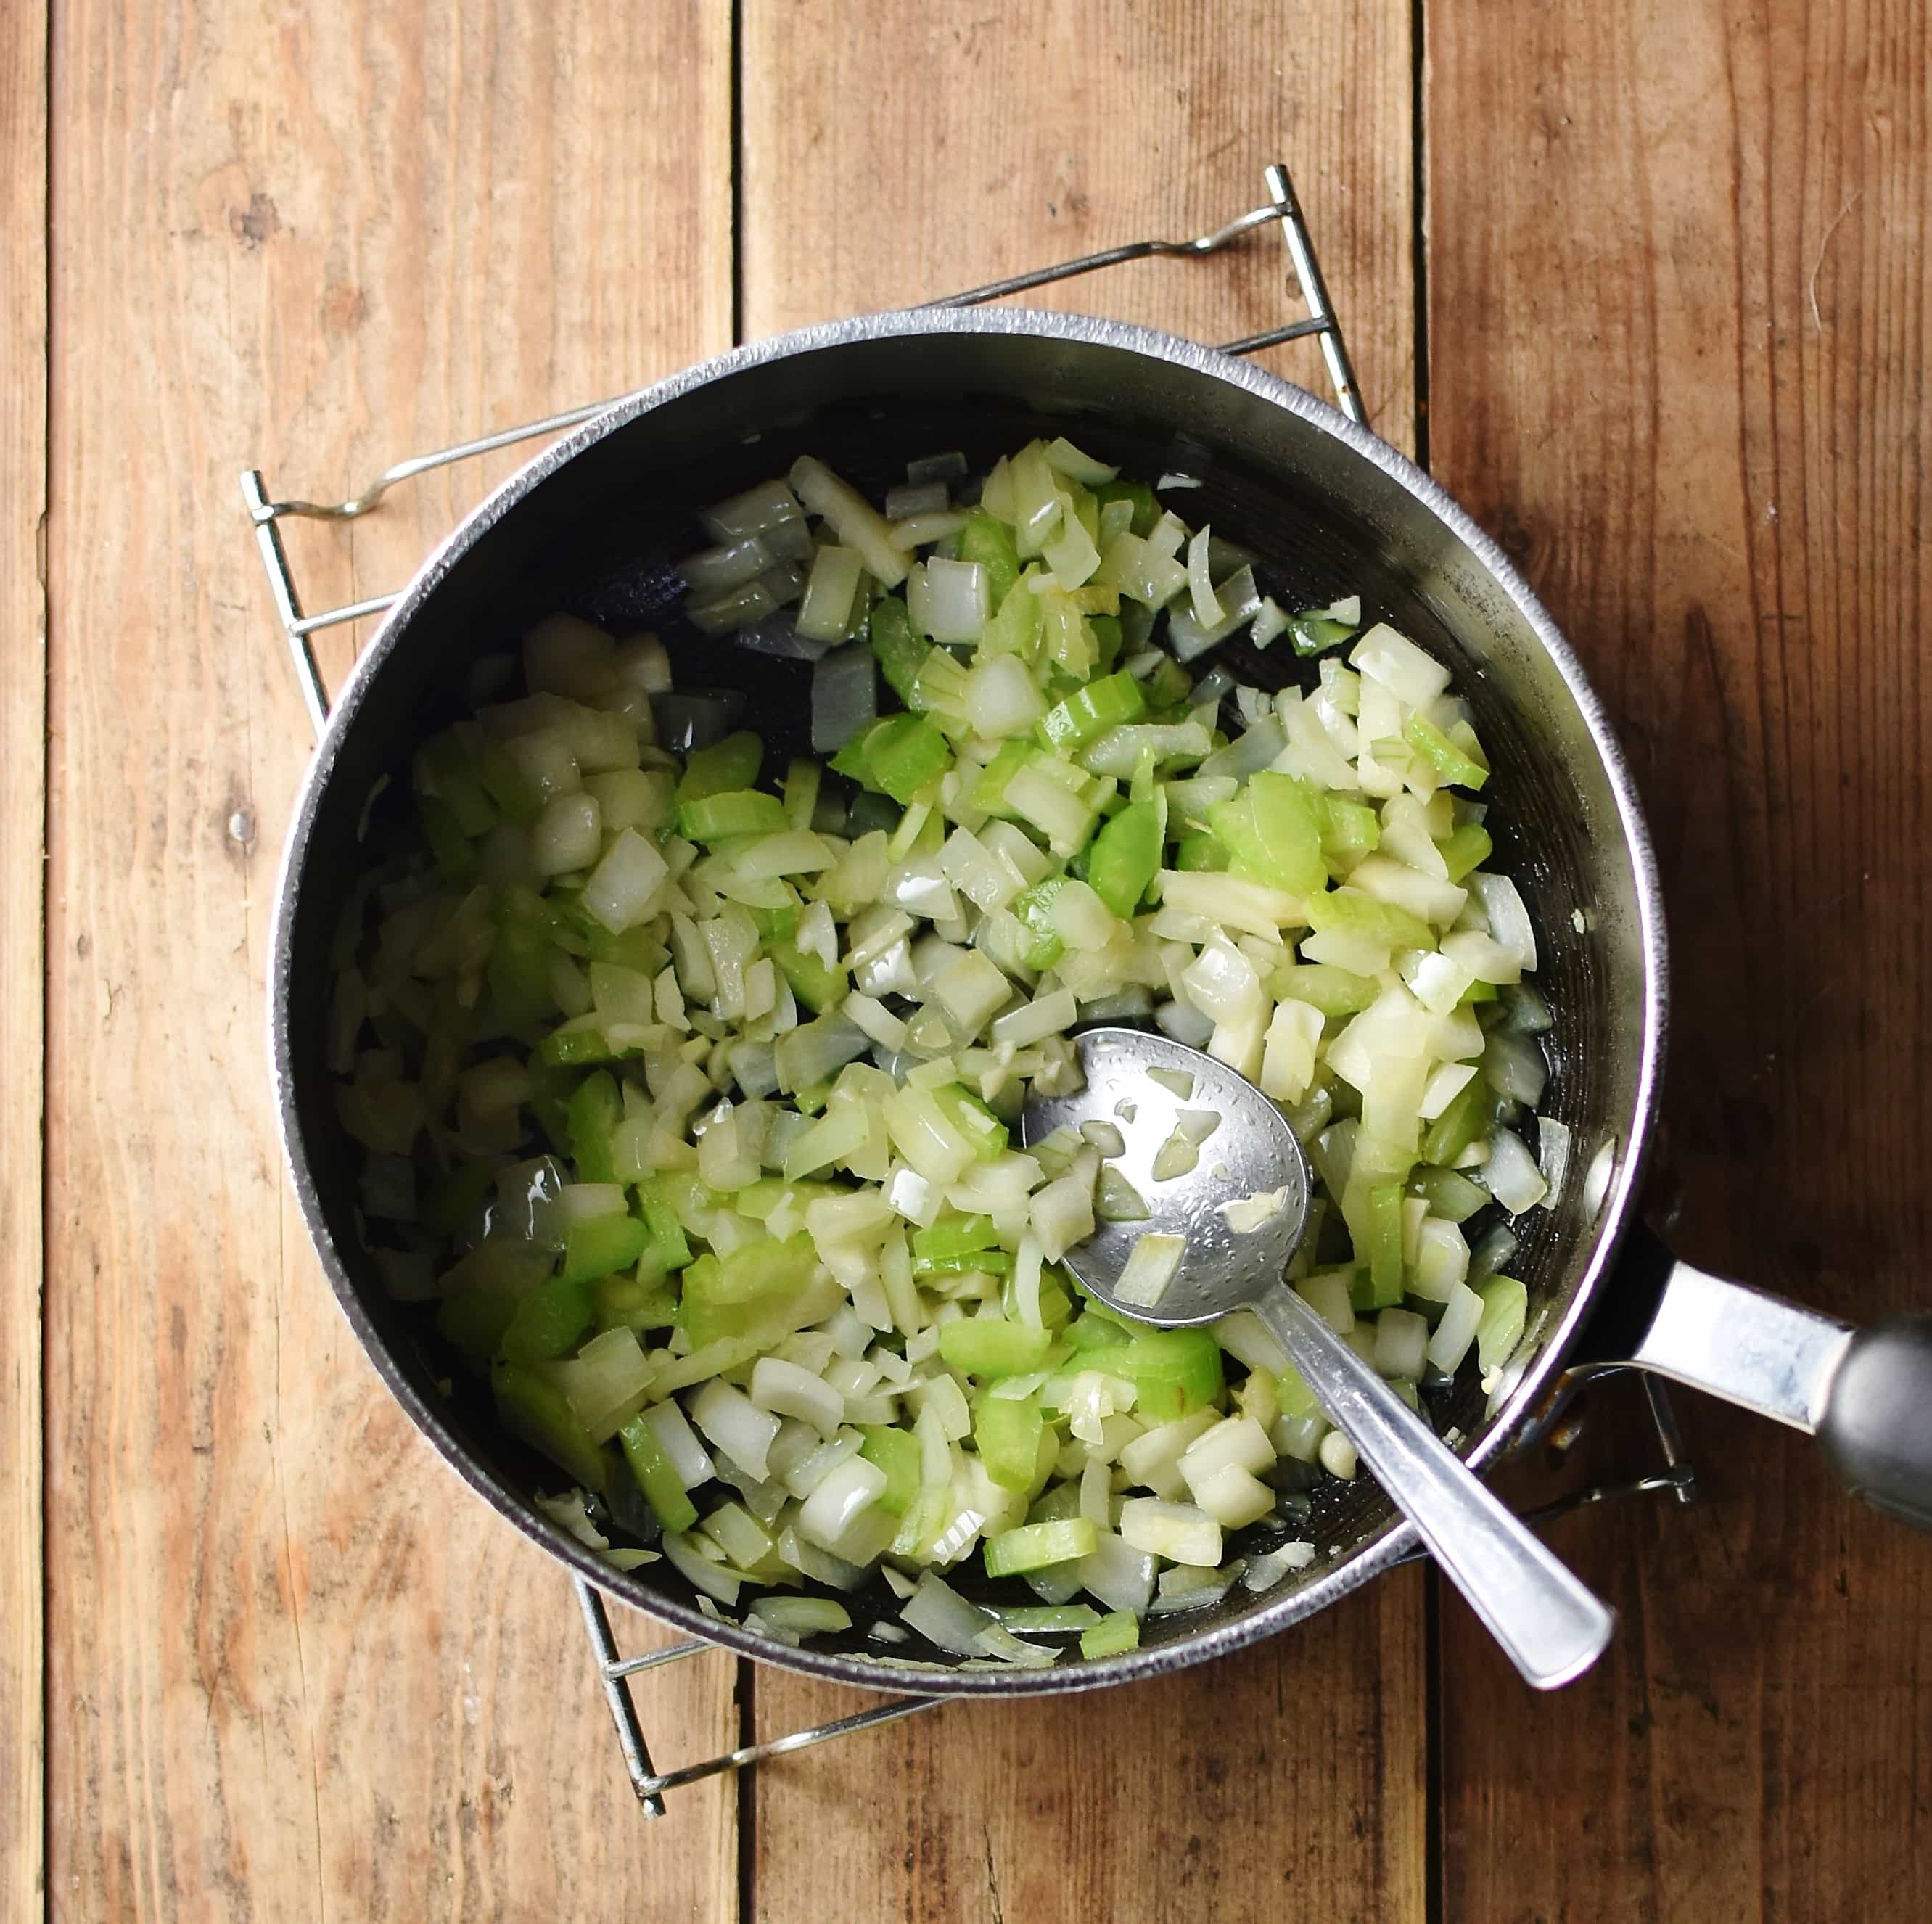 Chopped onions and celery in large pot with spoon.